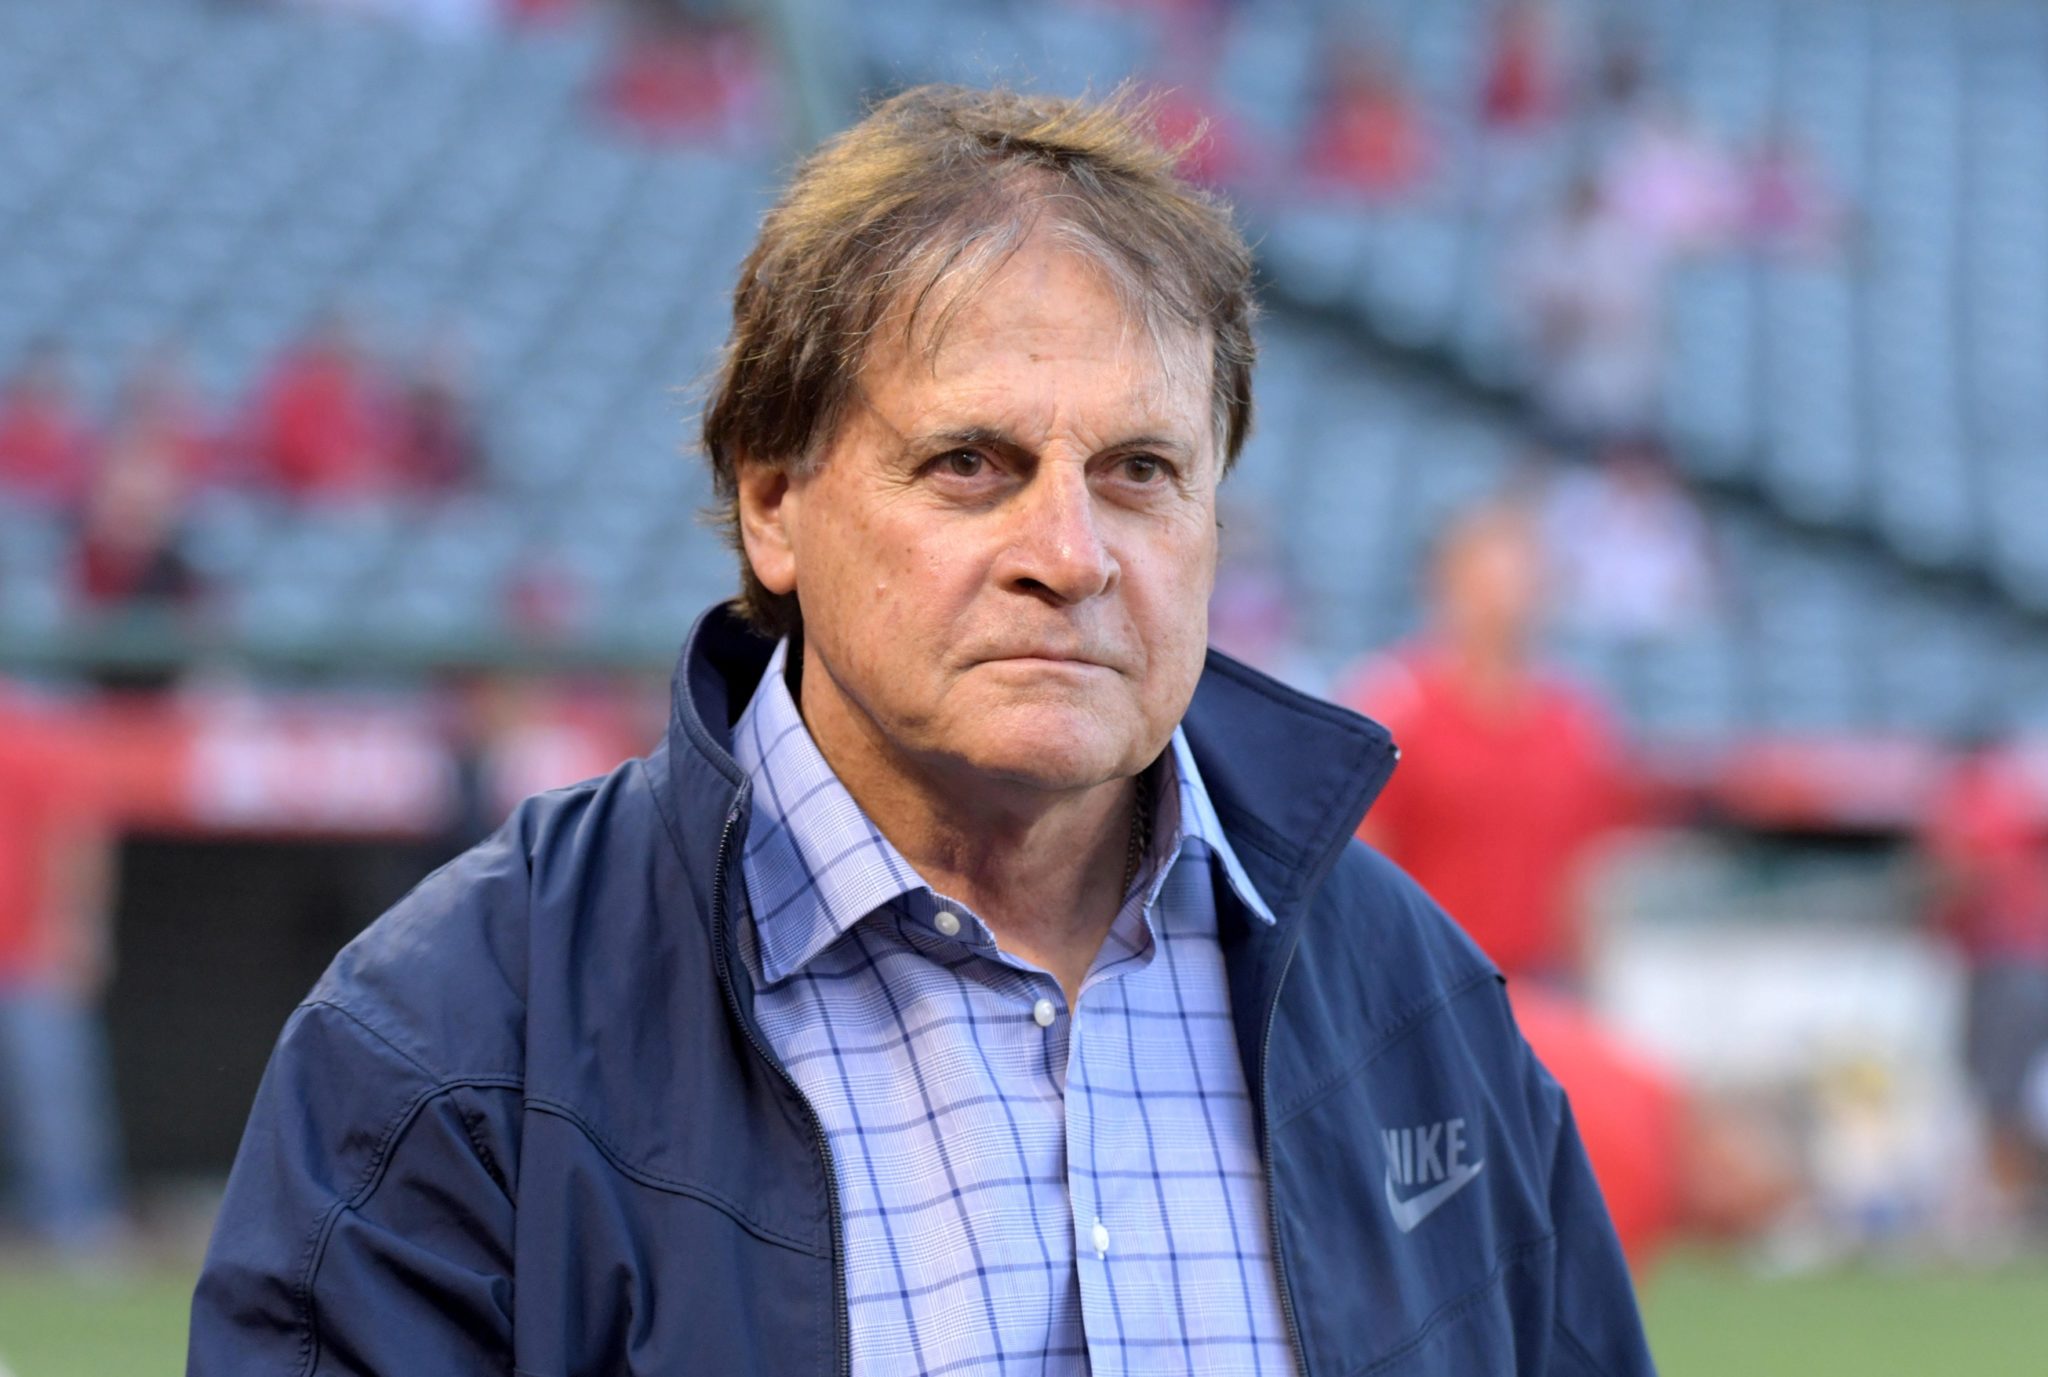 Tony La Russa Reportedly Told Police He was a “Hall of Famer Baseball Person” During DUI Arrest